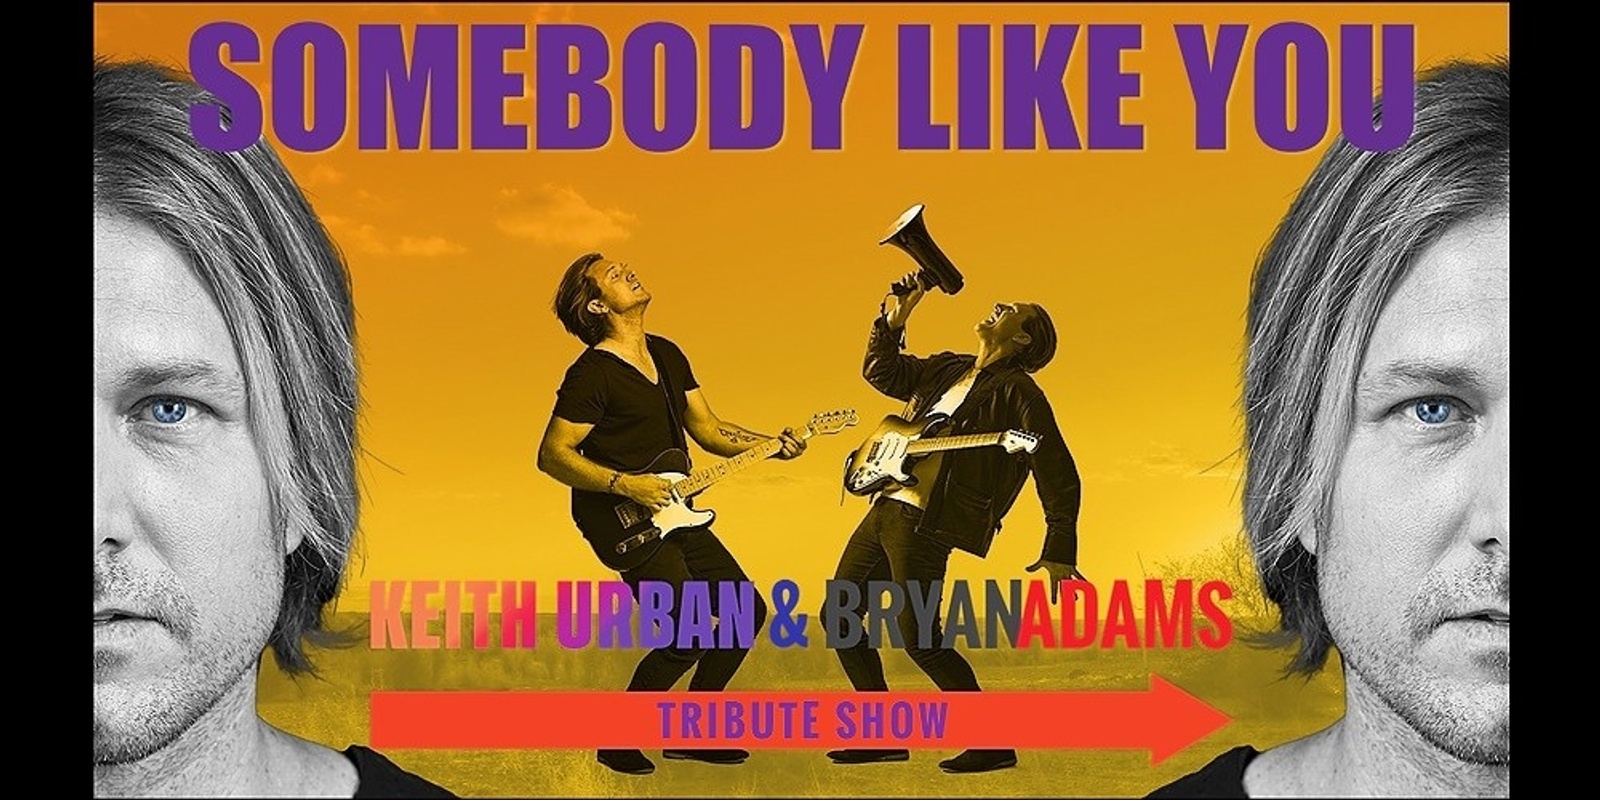 Banner image for FORBES - SOMEBODY LIKE YOU - KEITH URBAN & BRYAN ADAMS TRIBUTE SHOW 